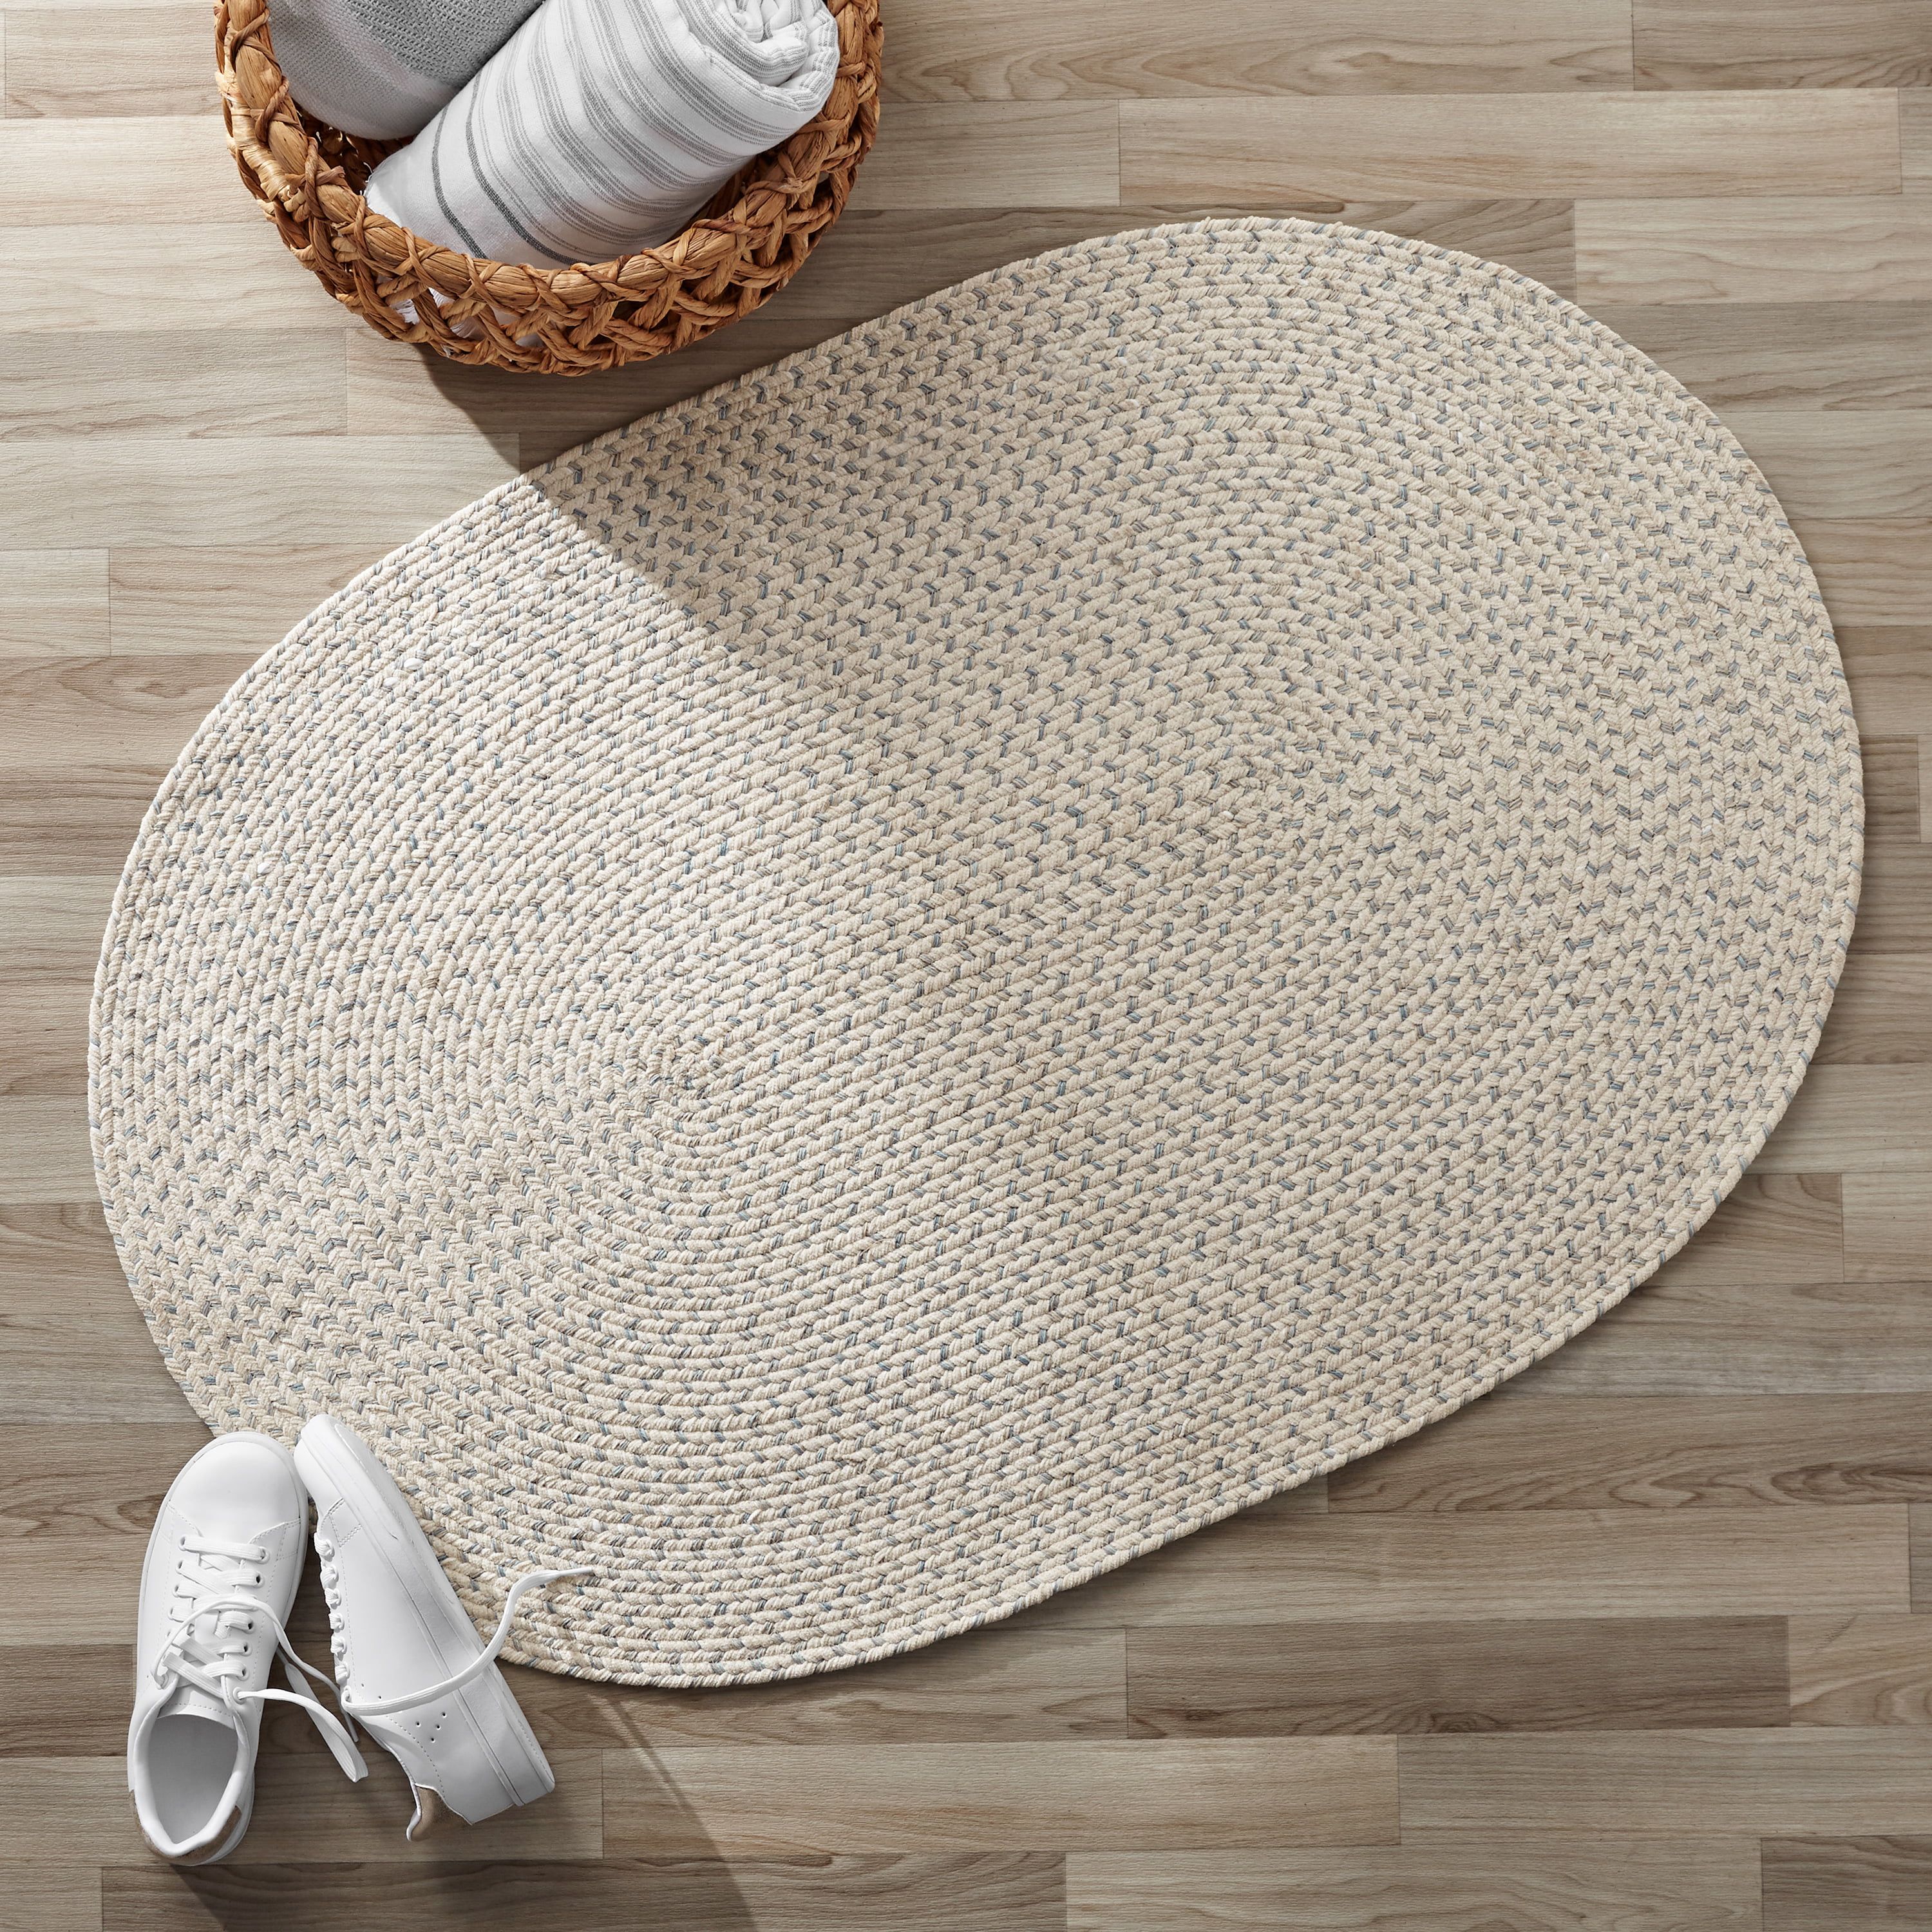 Better Homes & Gardens Braided Oval Accent Rug For Entryway, Ivory Multi,  30" X 44" – Walmart For Oval Rugs (View 8 of 15)